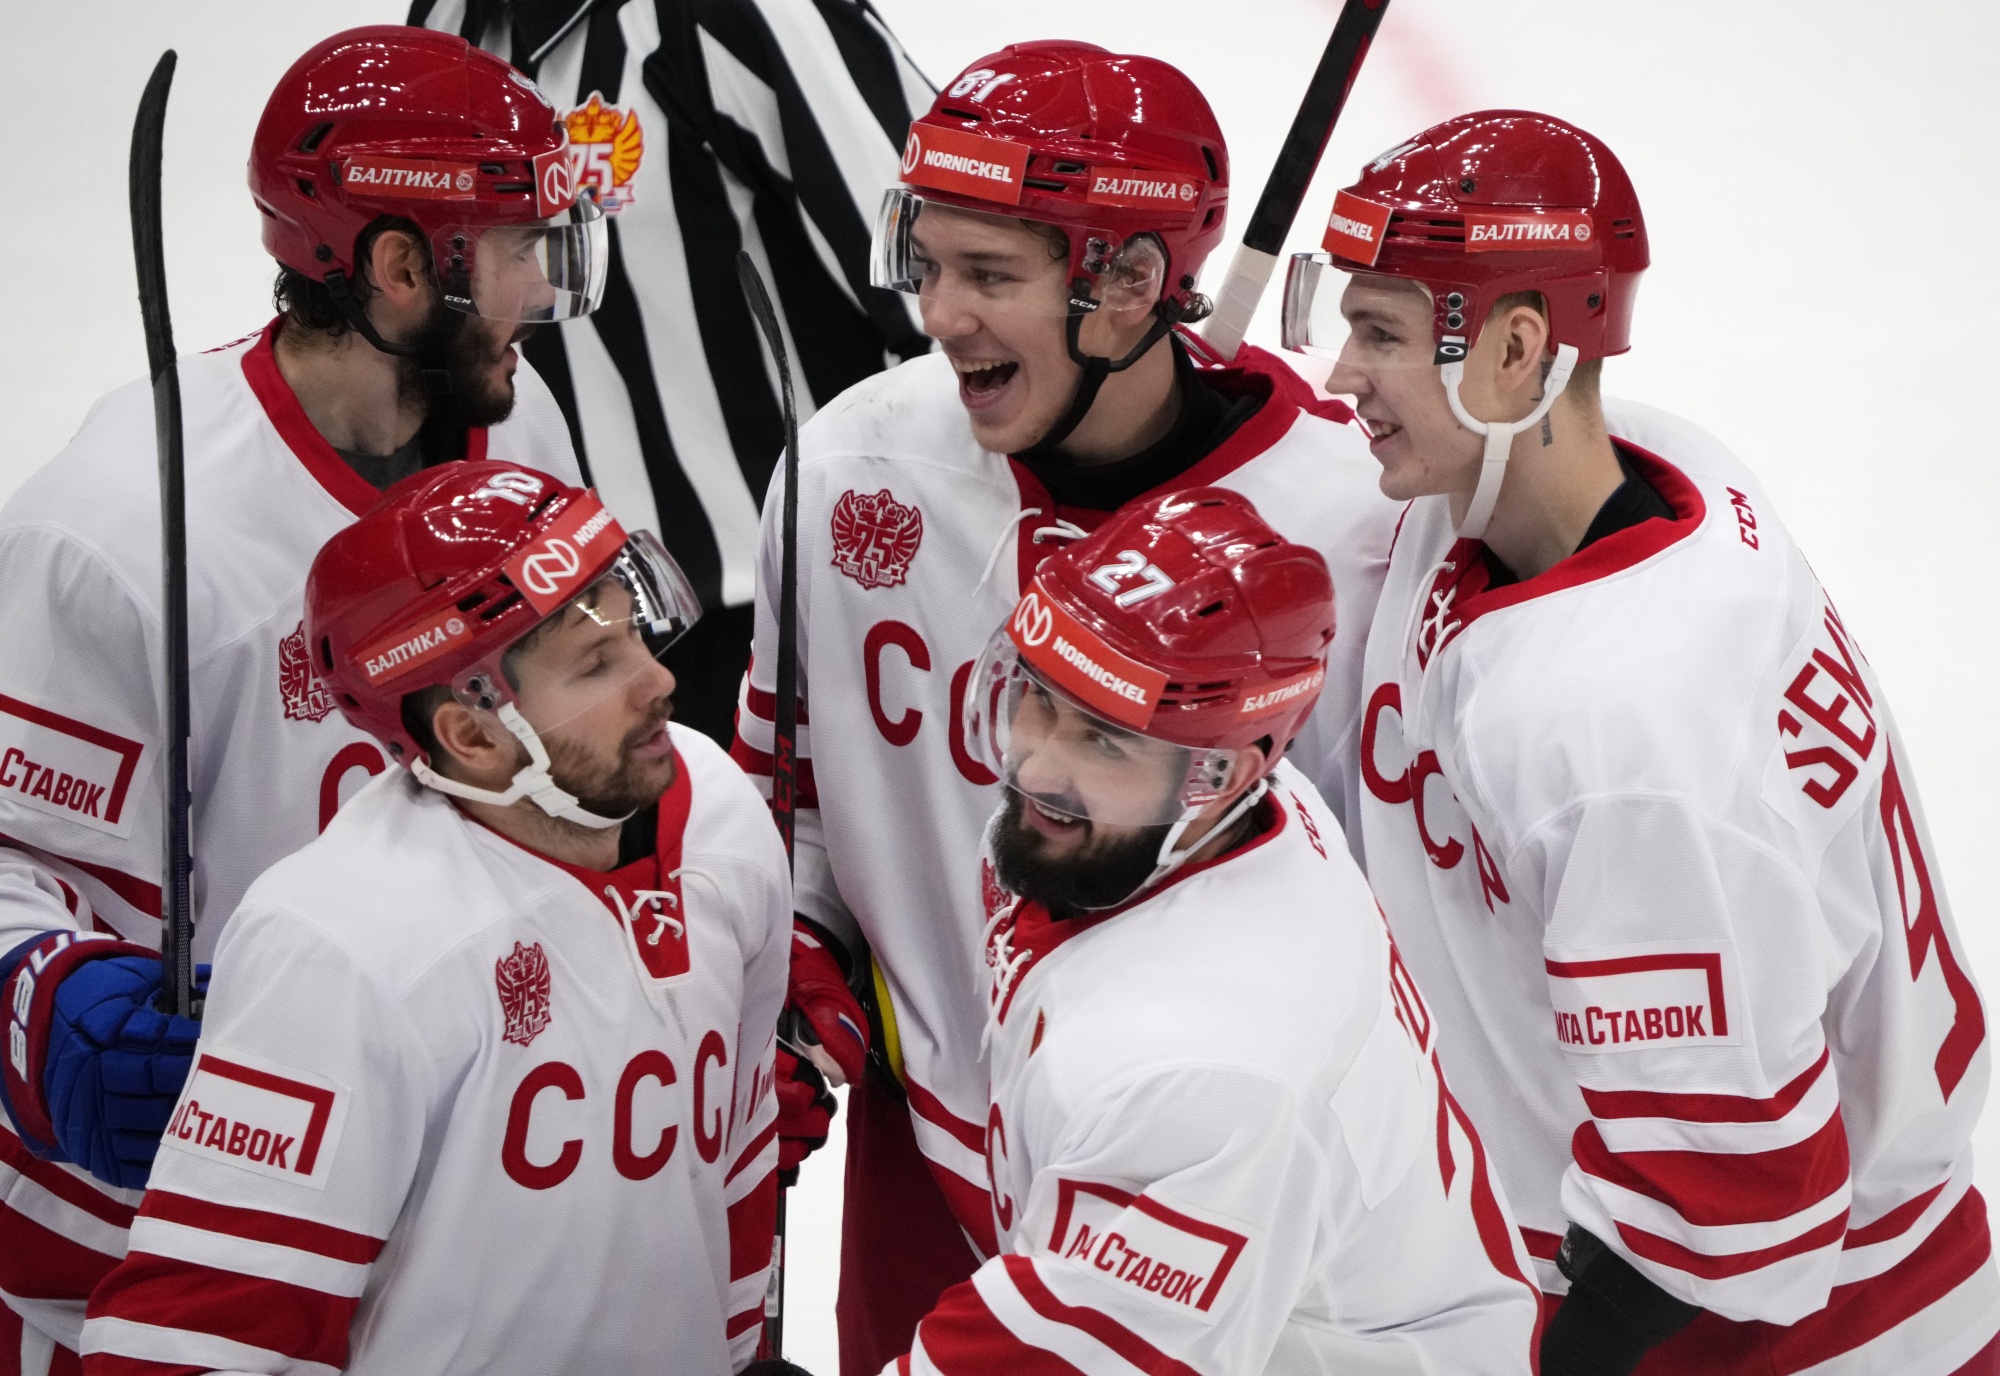 NHL players will not participate at 2022 Beijing Olympics due to COVID-19:  reports - National